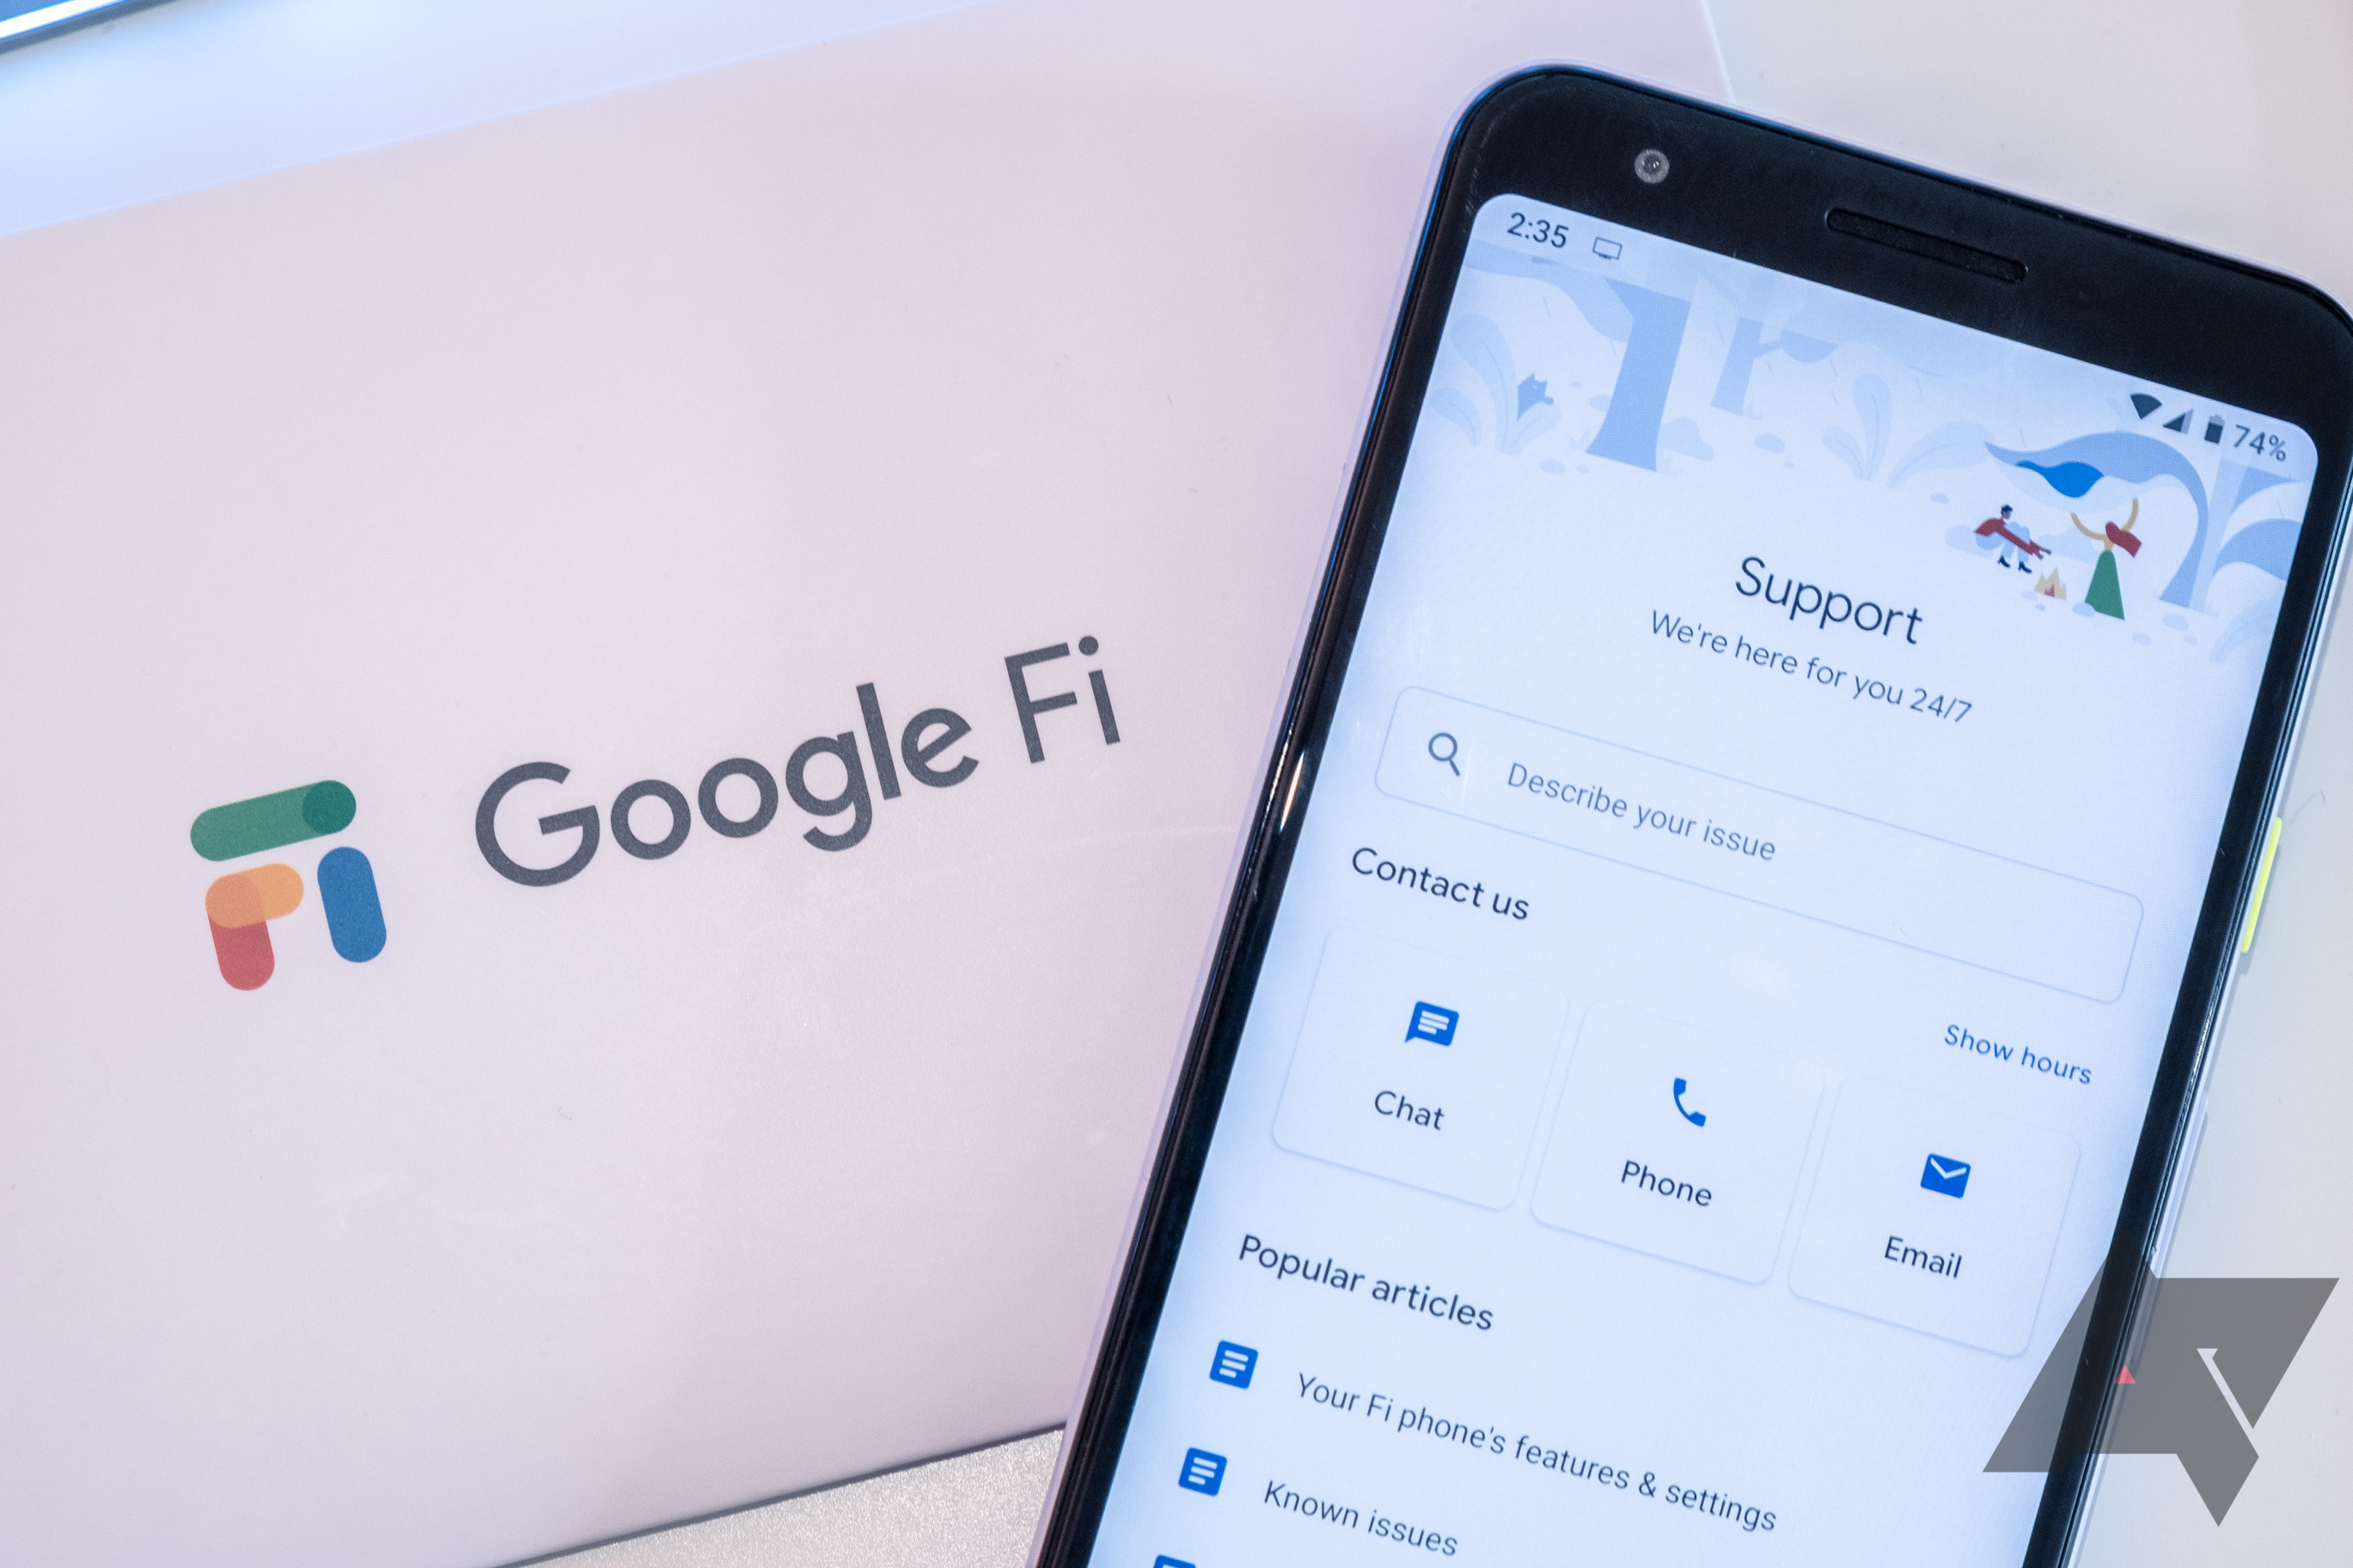 How to Reach Customer Service for Google Fi Phones